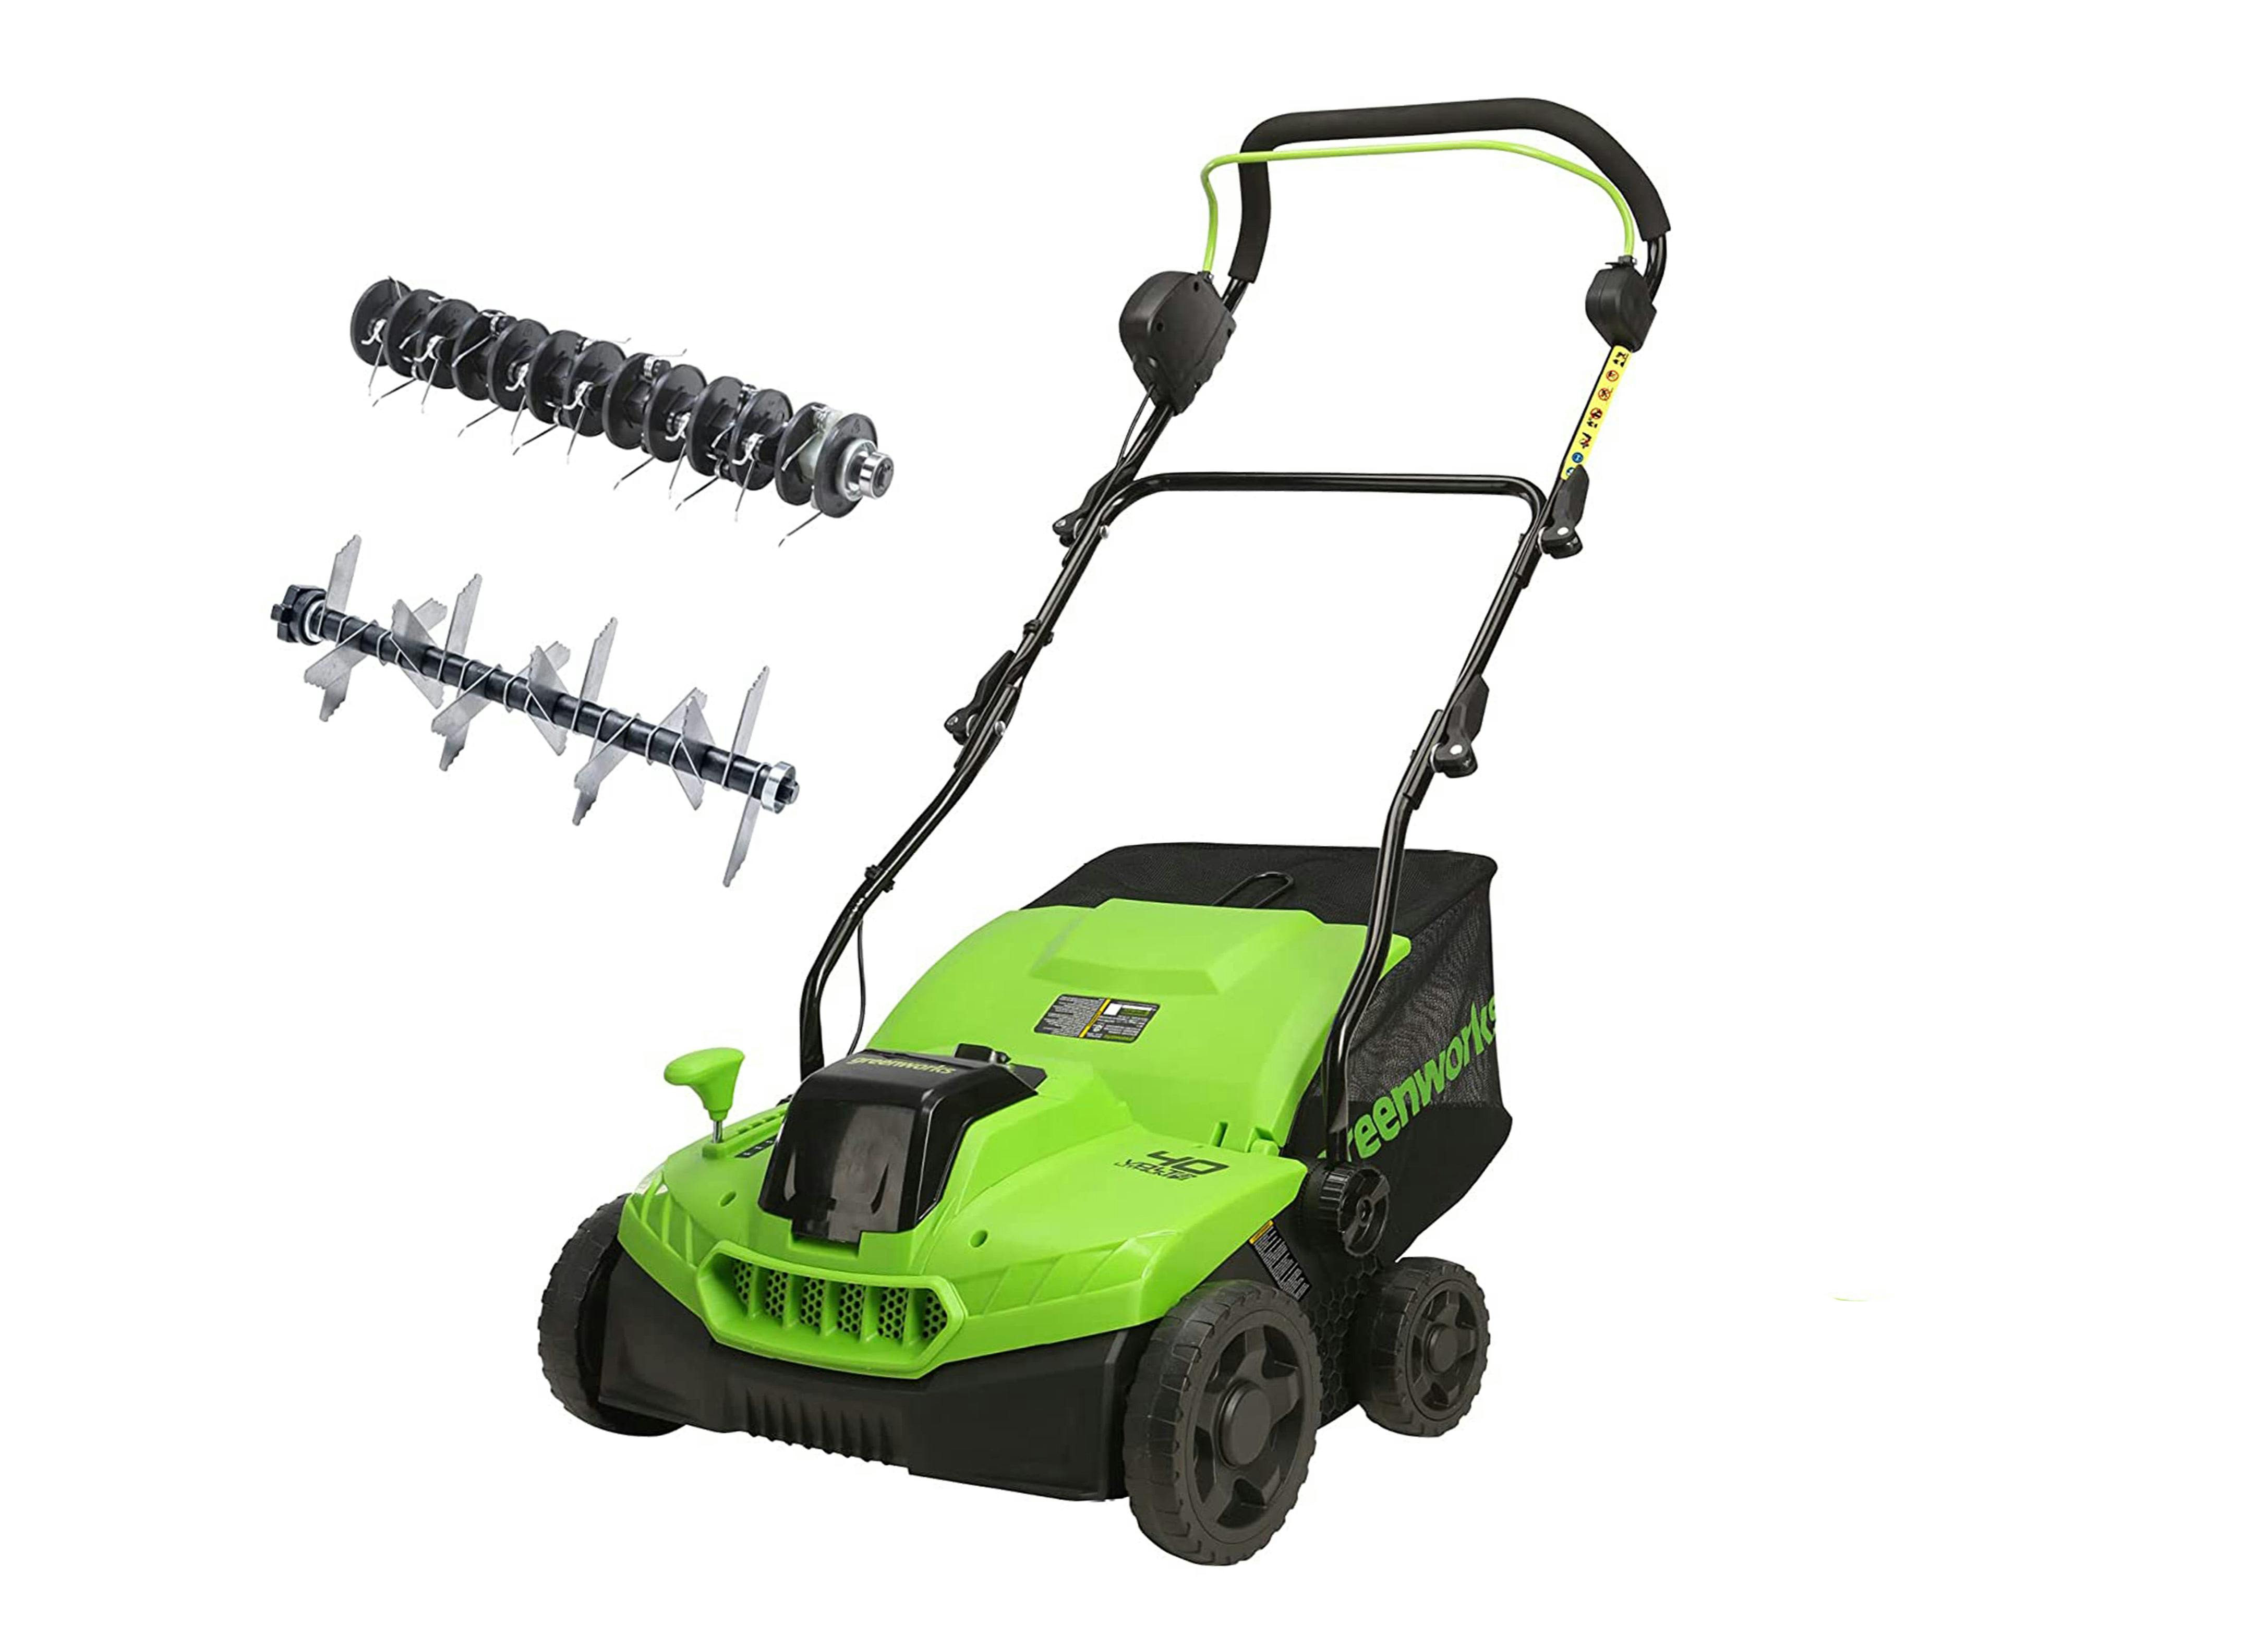 https://tradetested.imgix.net/catalog/product/_/2/_2518407au_greenworks_scarifier_brushless_40v_360mm-skin.jpg?fit=fillmax&fill=solid&auto=format%2Ccompress